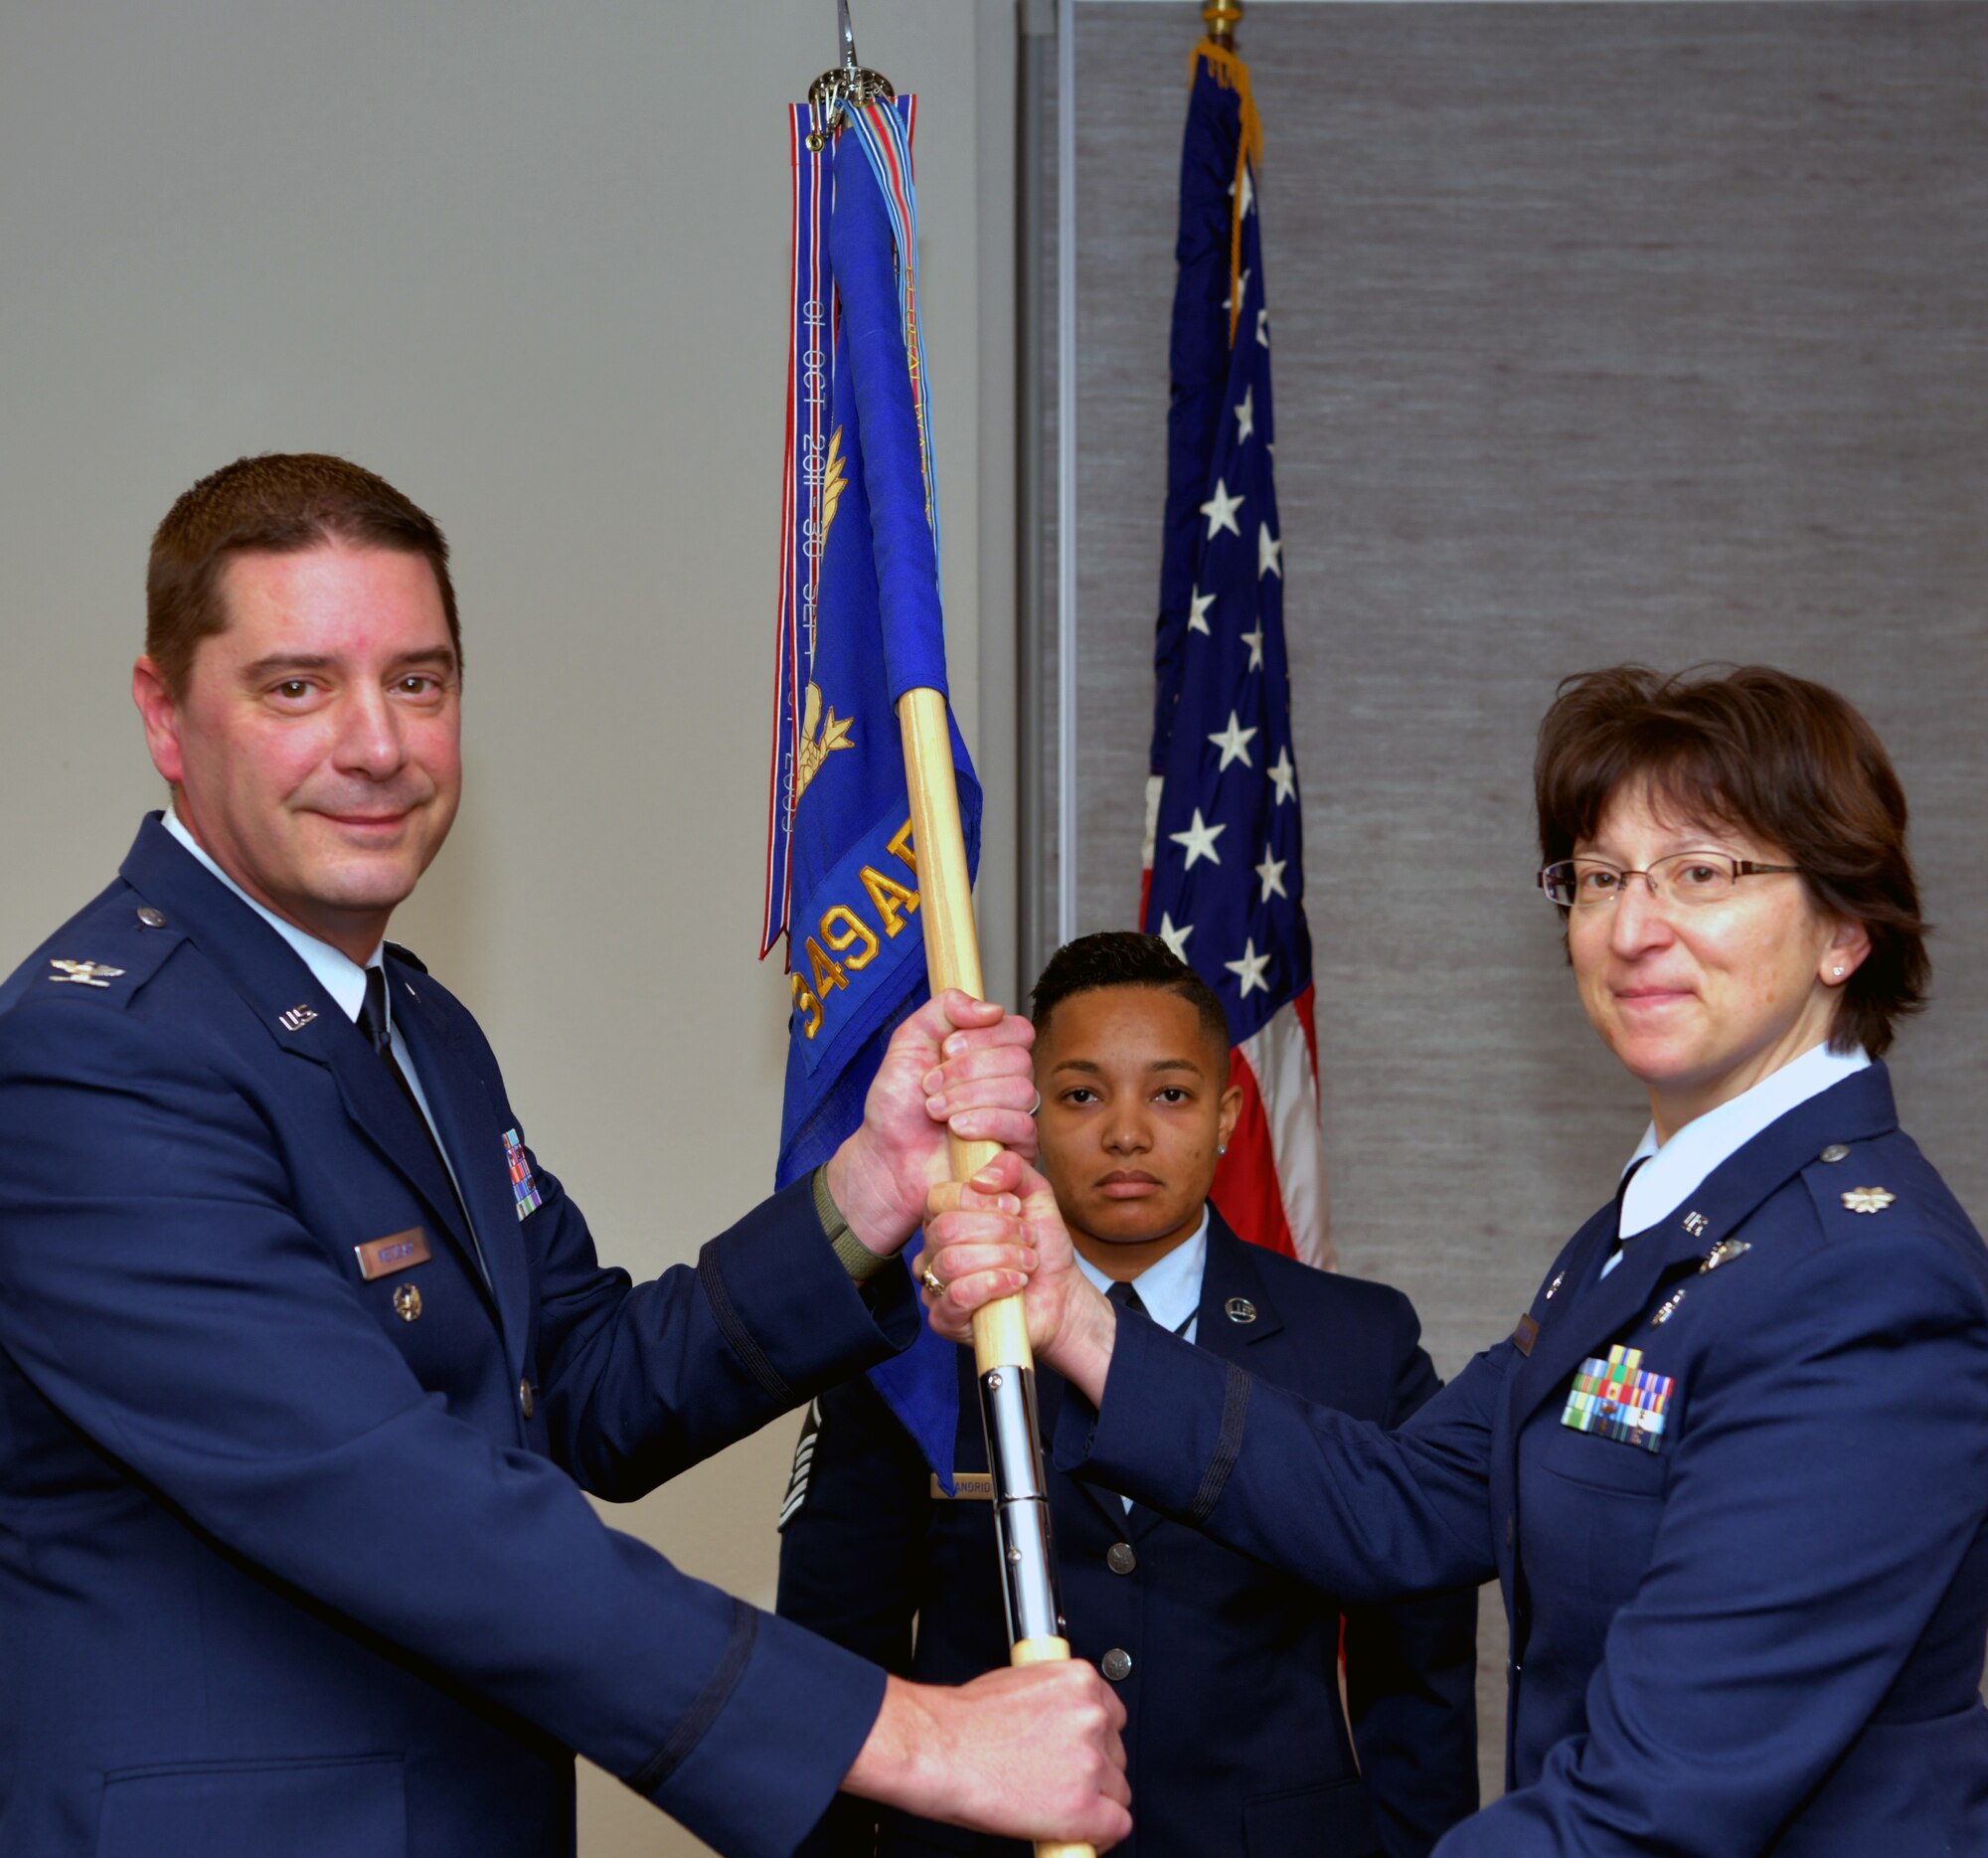 Lt. Col. Erin Hutchison, 349th Aeromedical Evacuation Squadron commander, recieves the guidon from Col. Charles Metzger, 349th Air Mobility Wing vice commander, during an assumption command ceremony on Dec. 8, 2018, at Travis Air Force Base, Calif.